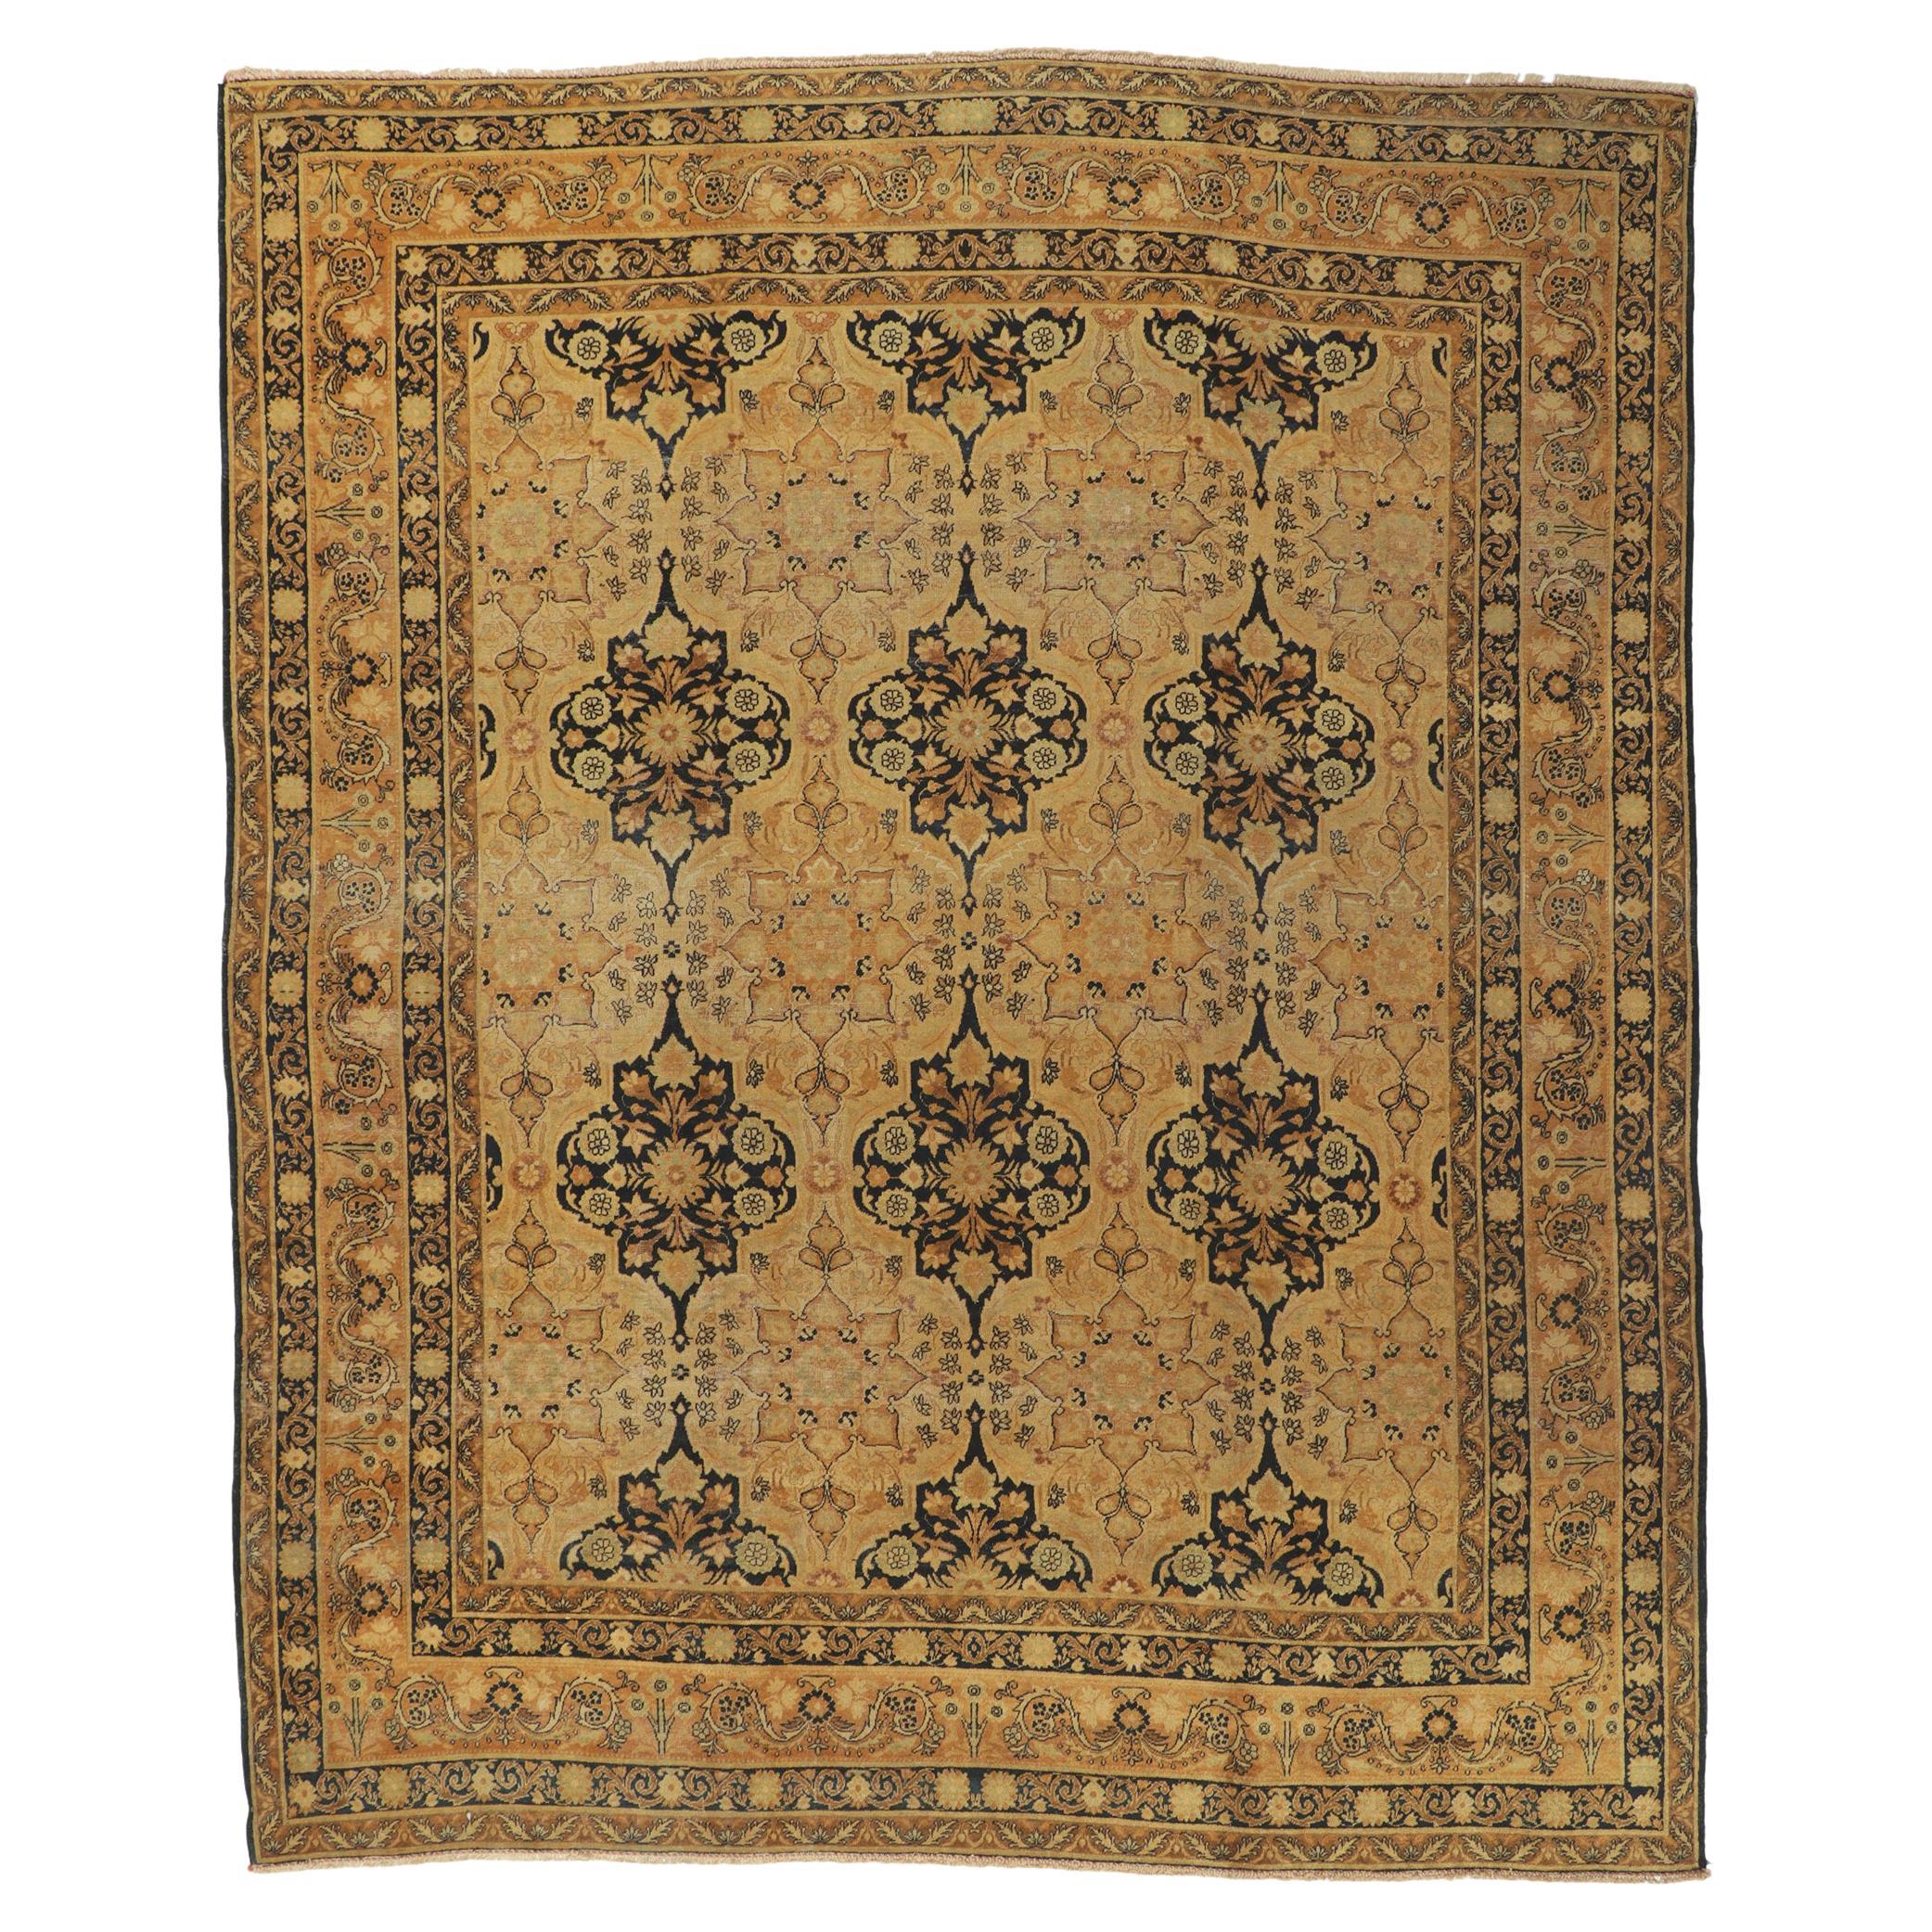 Distressed Antique Persian Yazd Rug with Rustic Artisan Style